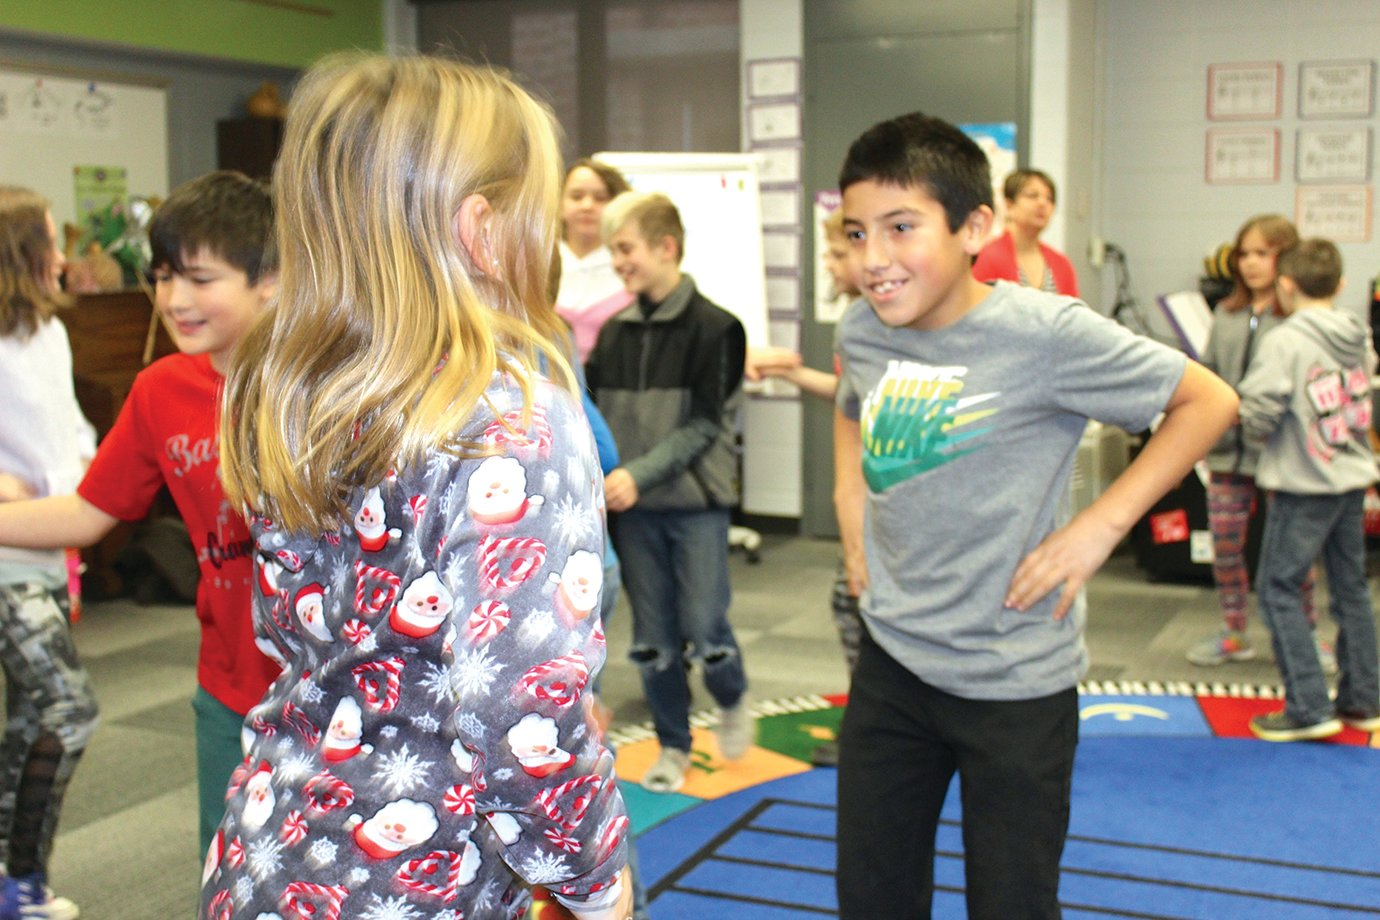 Darrick Fuentes, fourth grader at Ladoga Elementary, looks to his partner ahead of Instructor Jennifer Ellingwood's directions during music class Thursday.